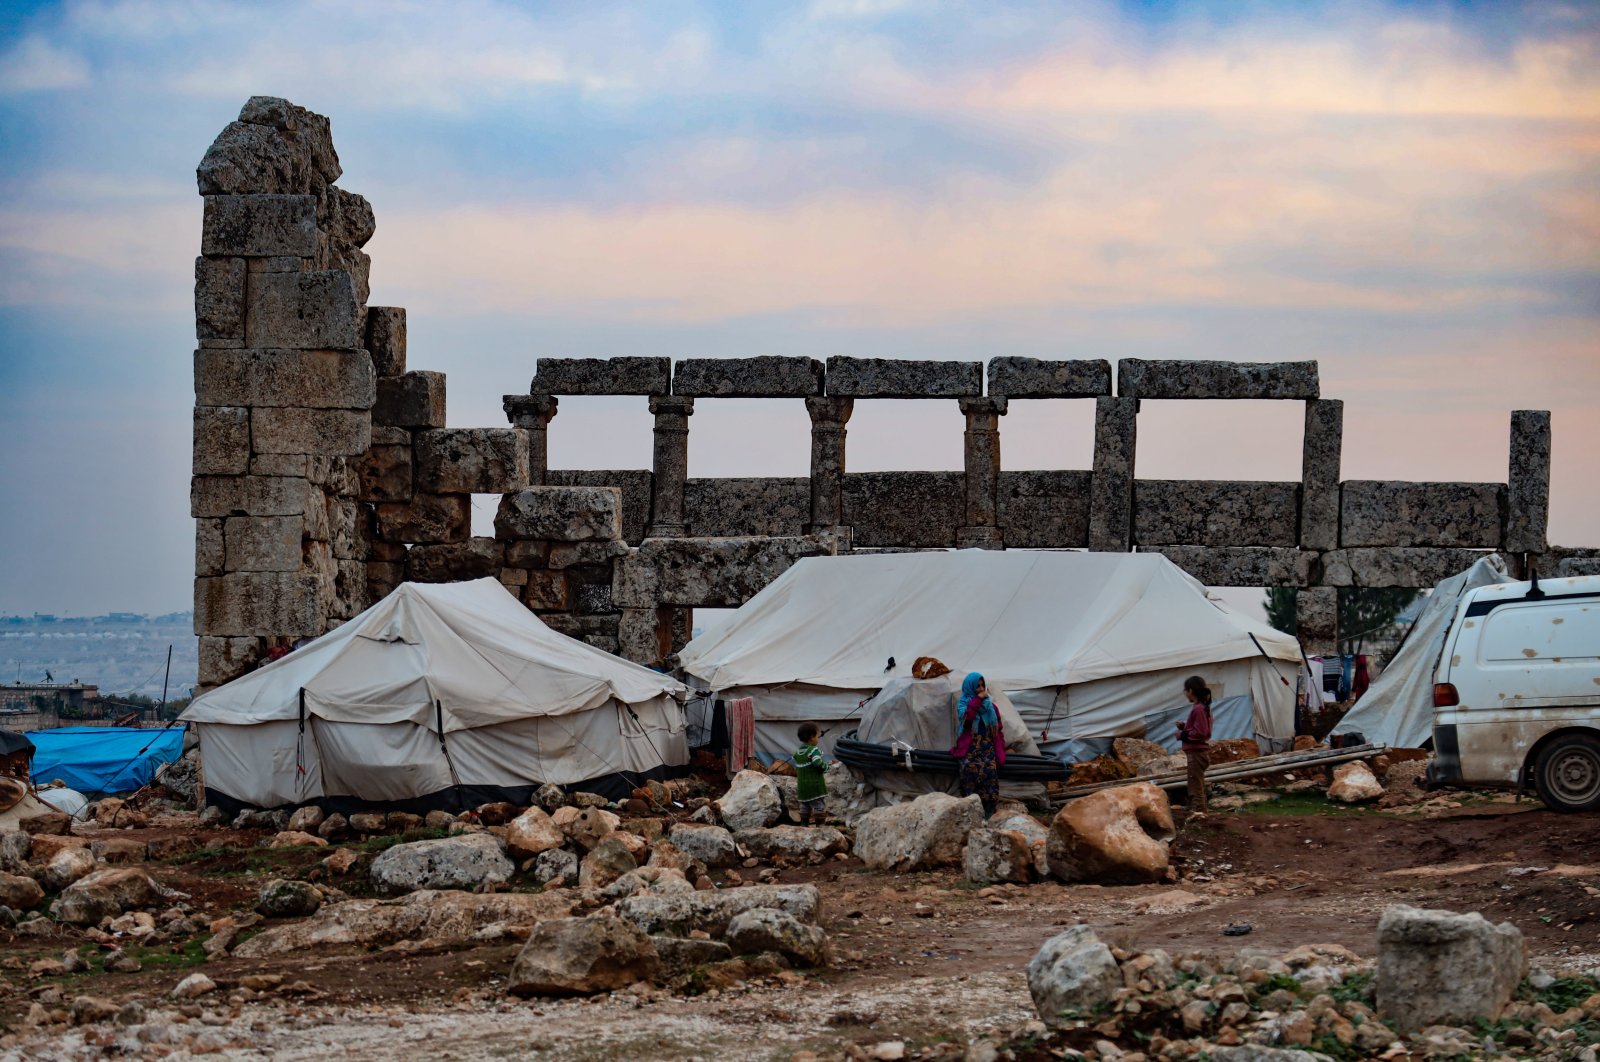 Tents seen set up at the Dana ancient site in Idlib, northern Syria, Dec. 20, 2020. (Photo by Getty Images)